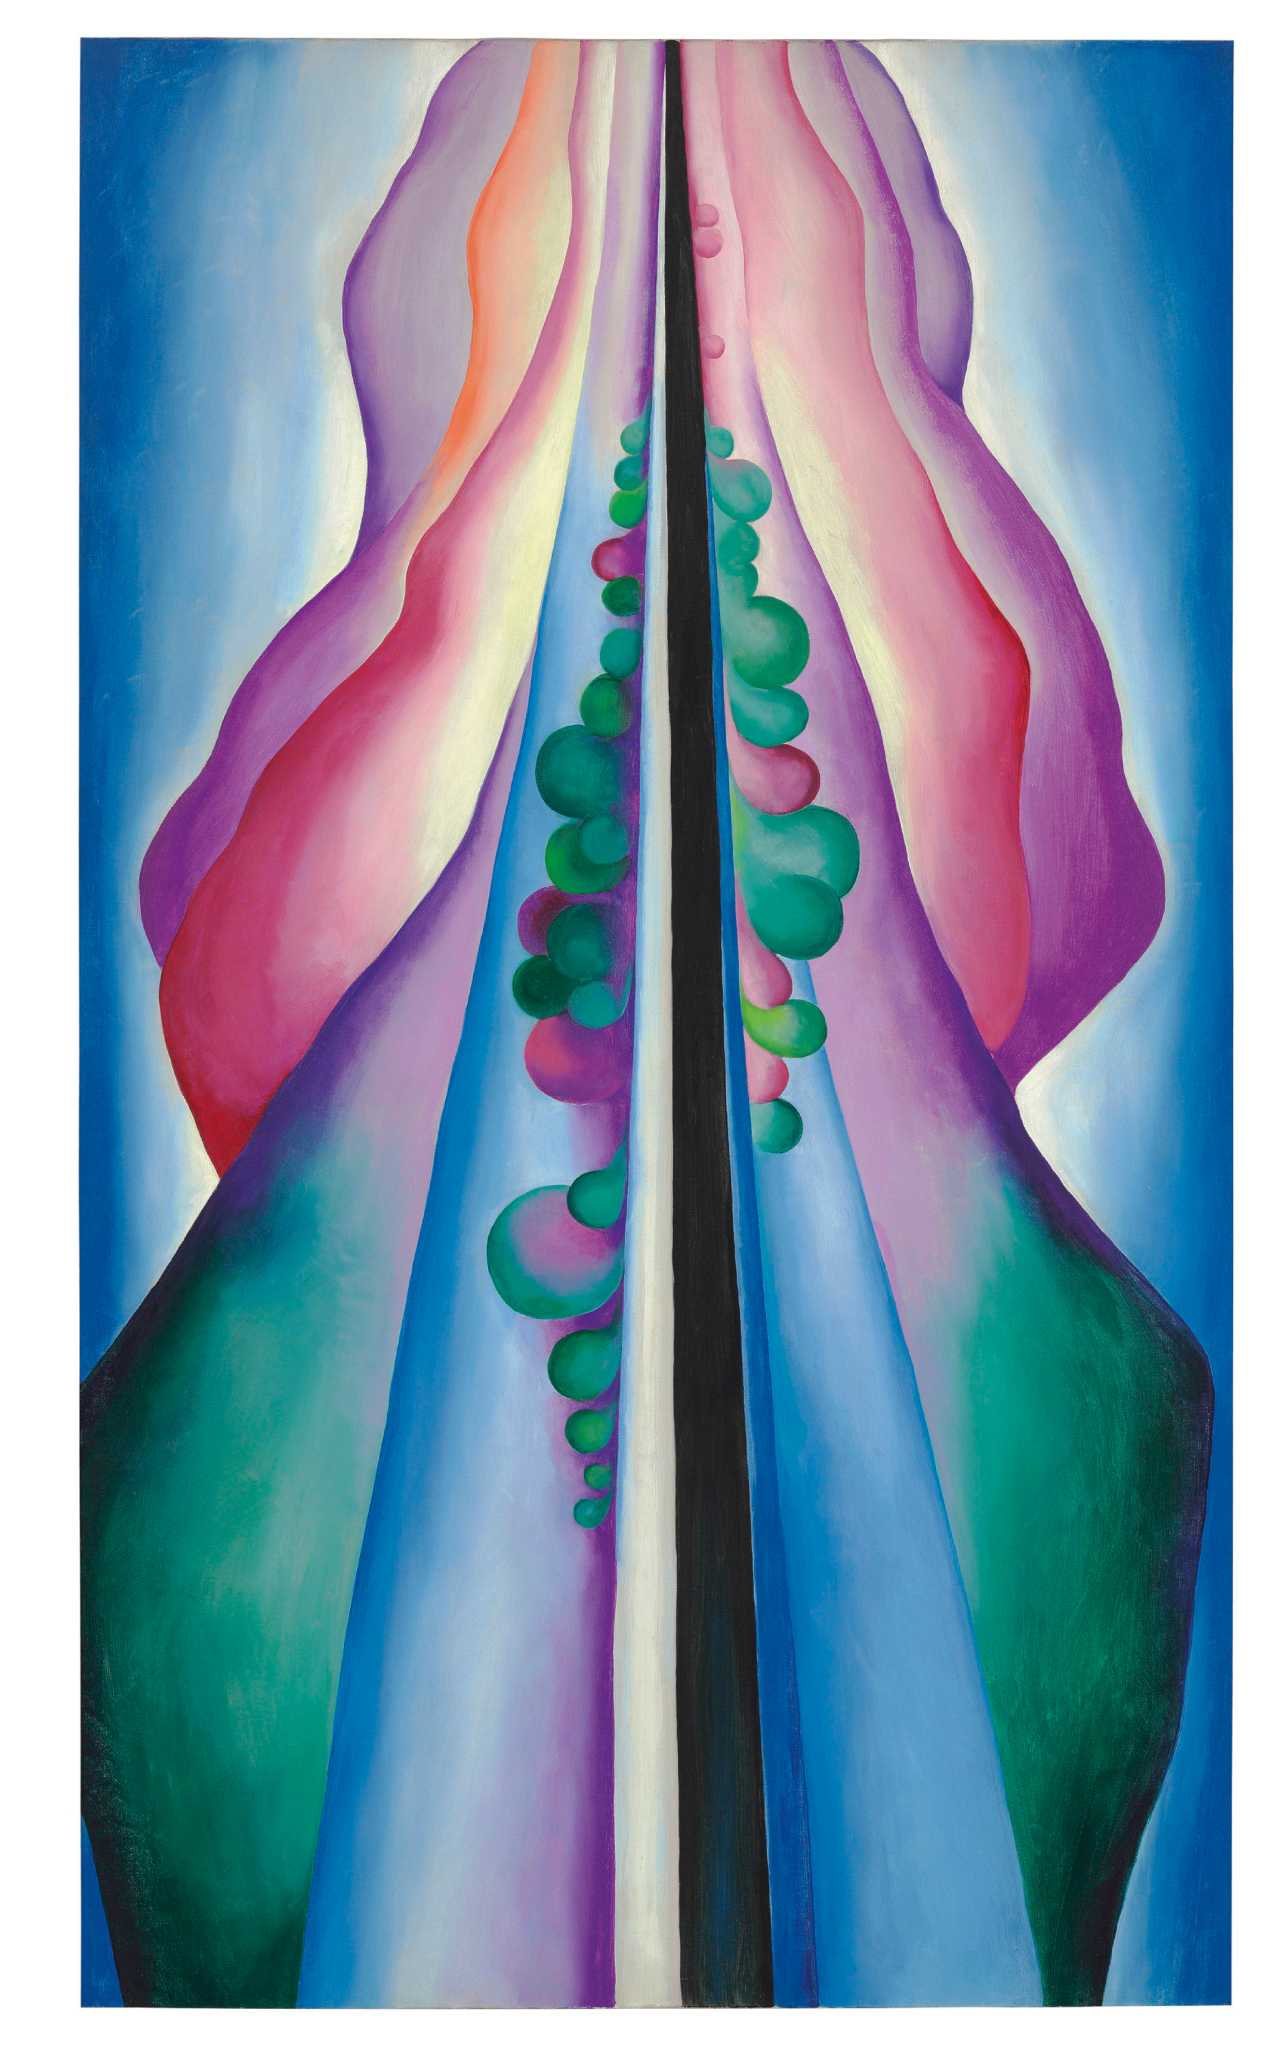 Unusual Georgia O'Keeffe painting of Lake George going to auction